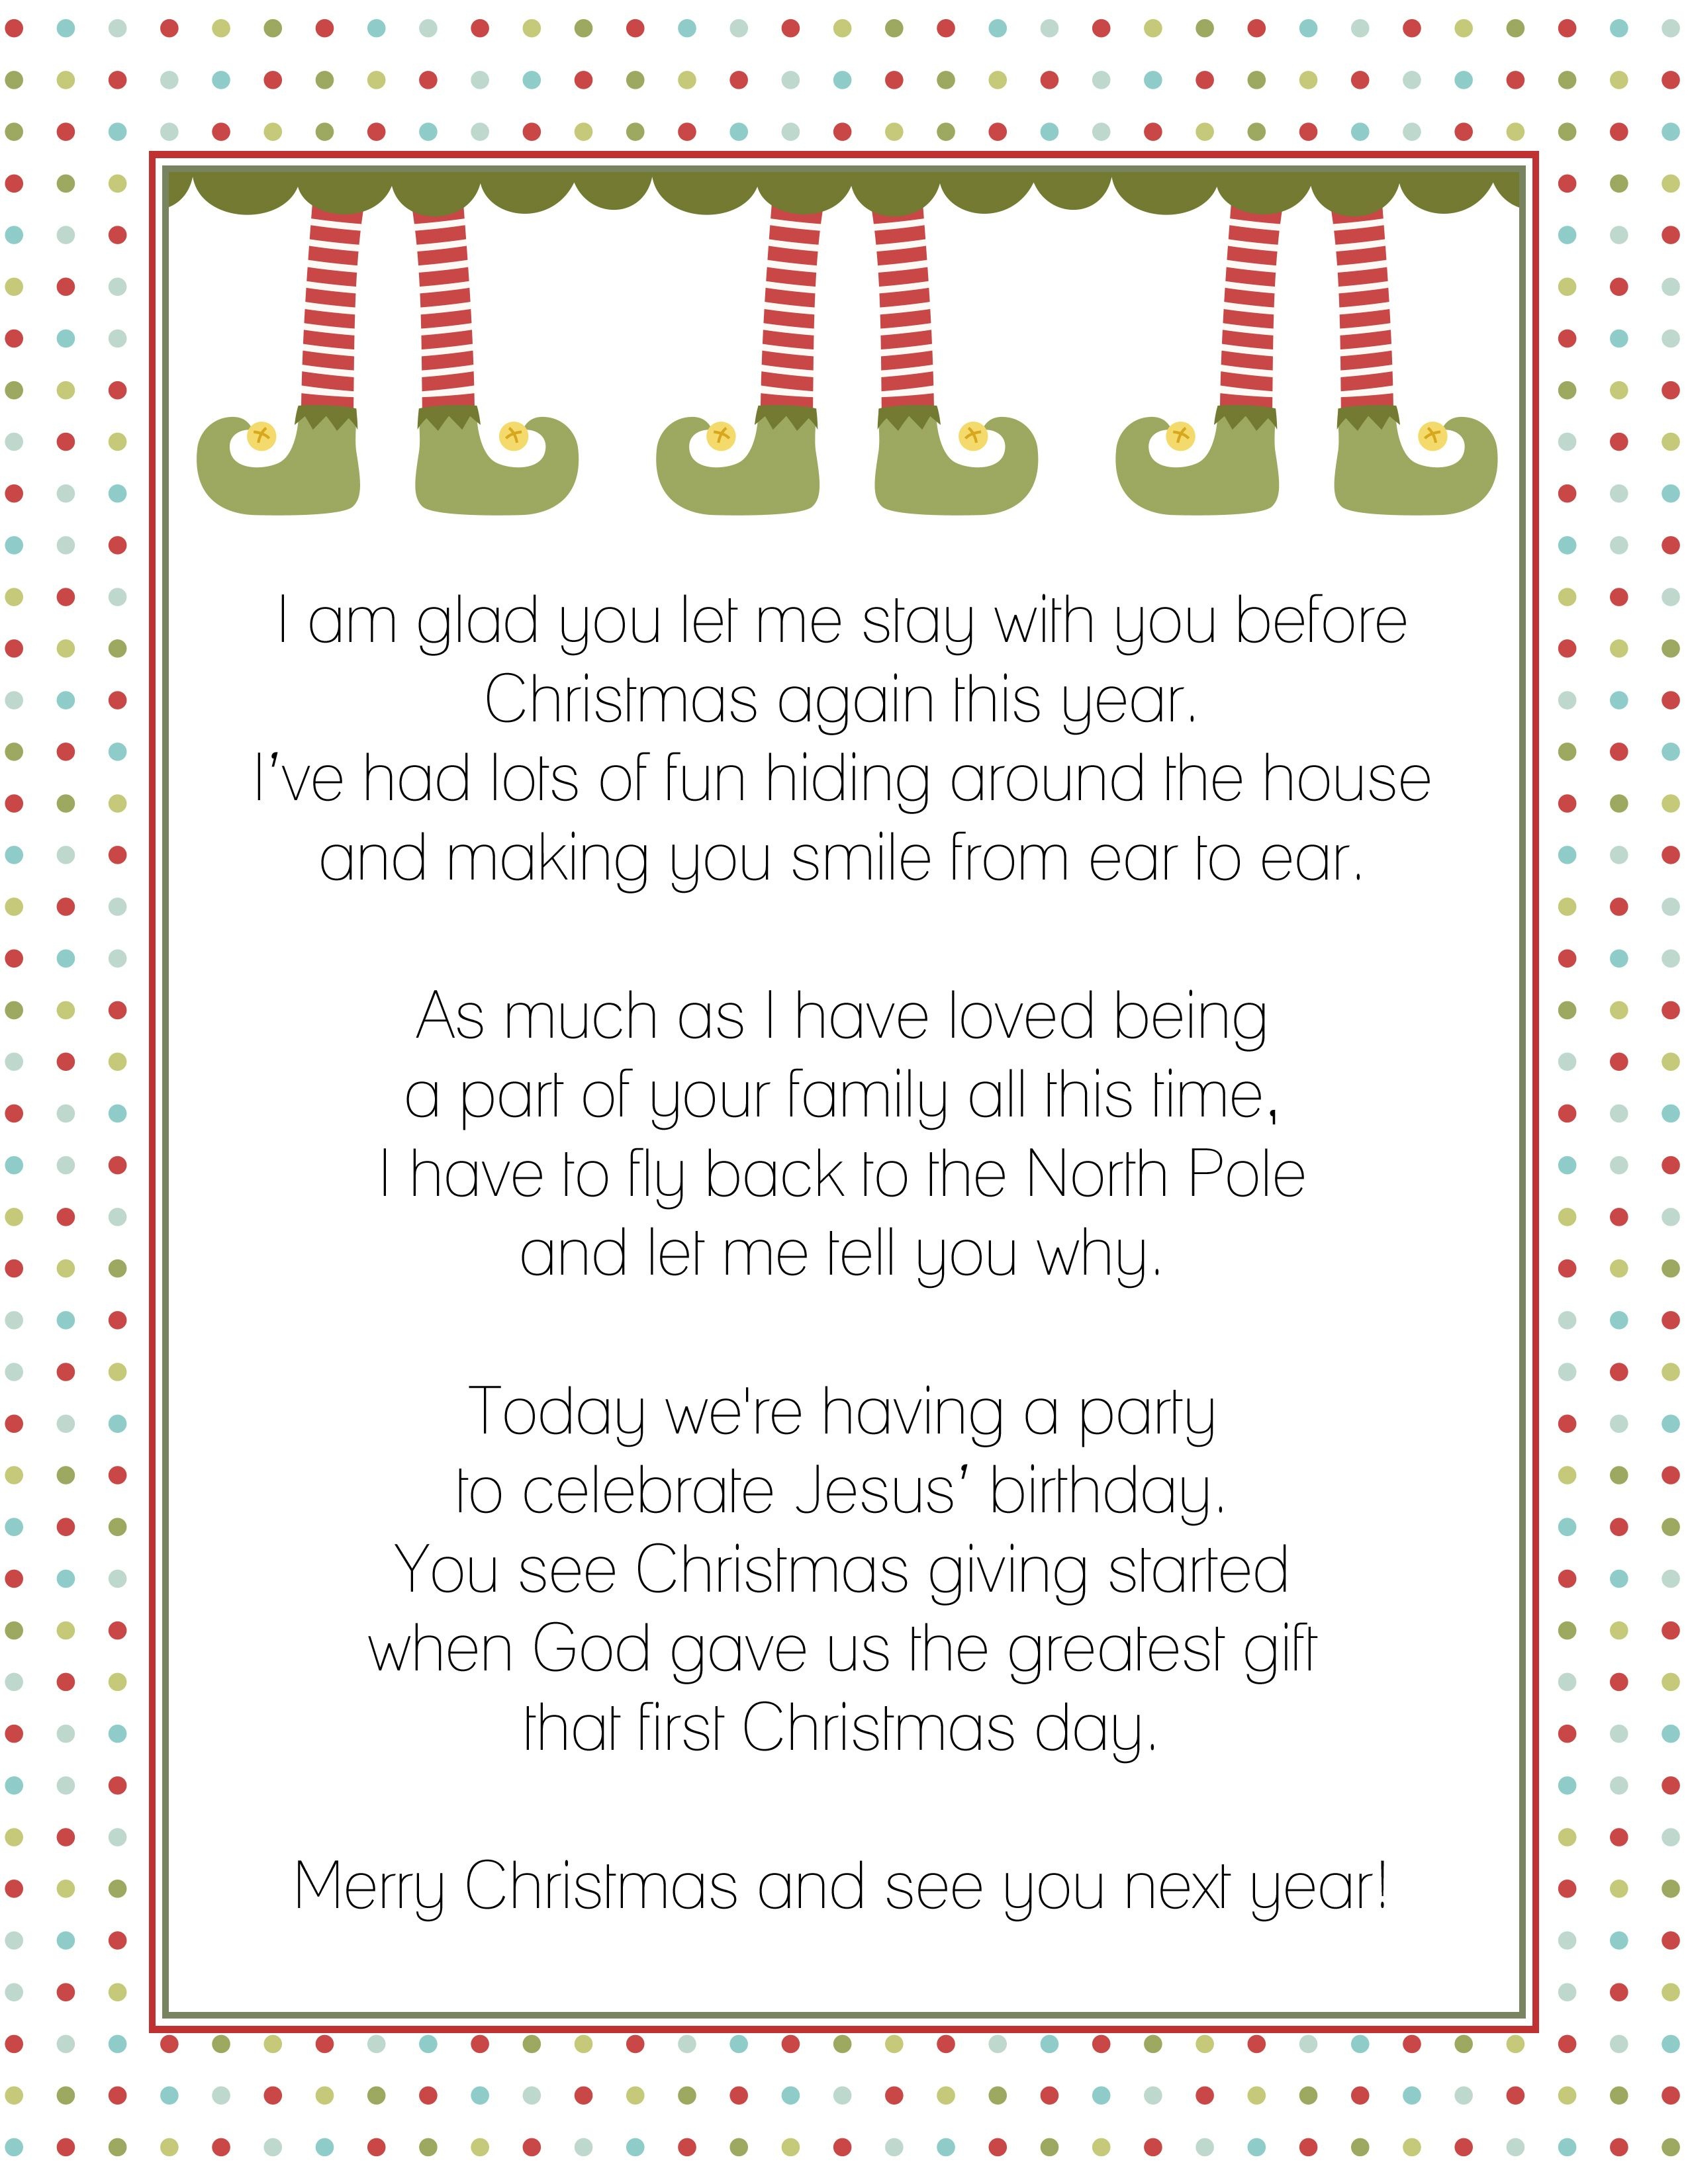 Goodbye Letter From The Elf On A Shelf | Christmas! | Elf Letters - Elf On The Shelf Goodbye Letter Free Printable